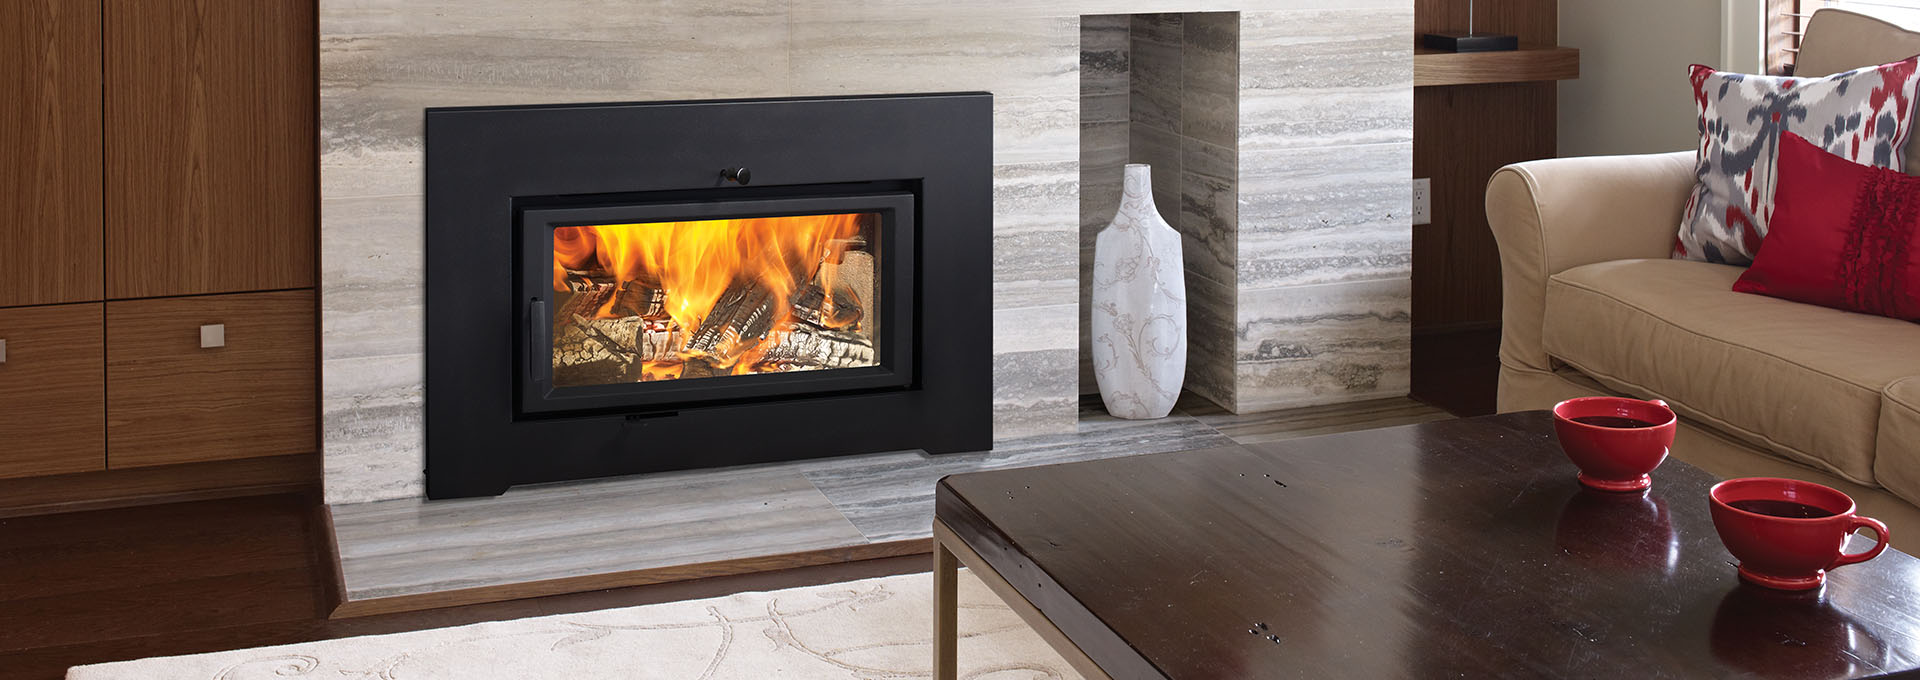 36 Inch Fireplace Insert Unique Wood Inserts Epa Certified